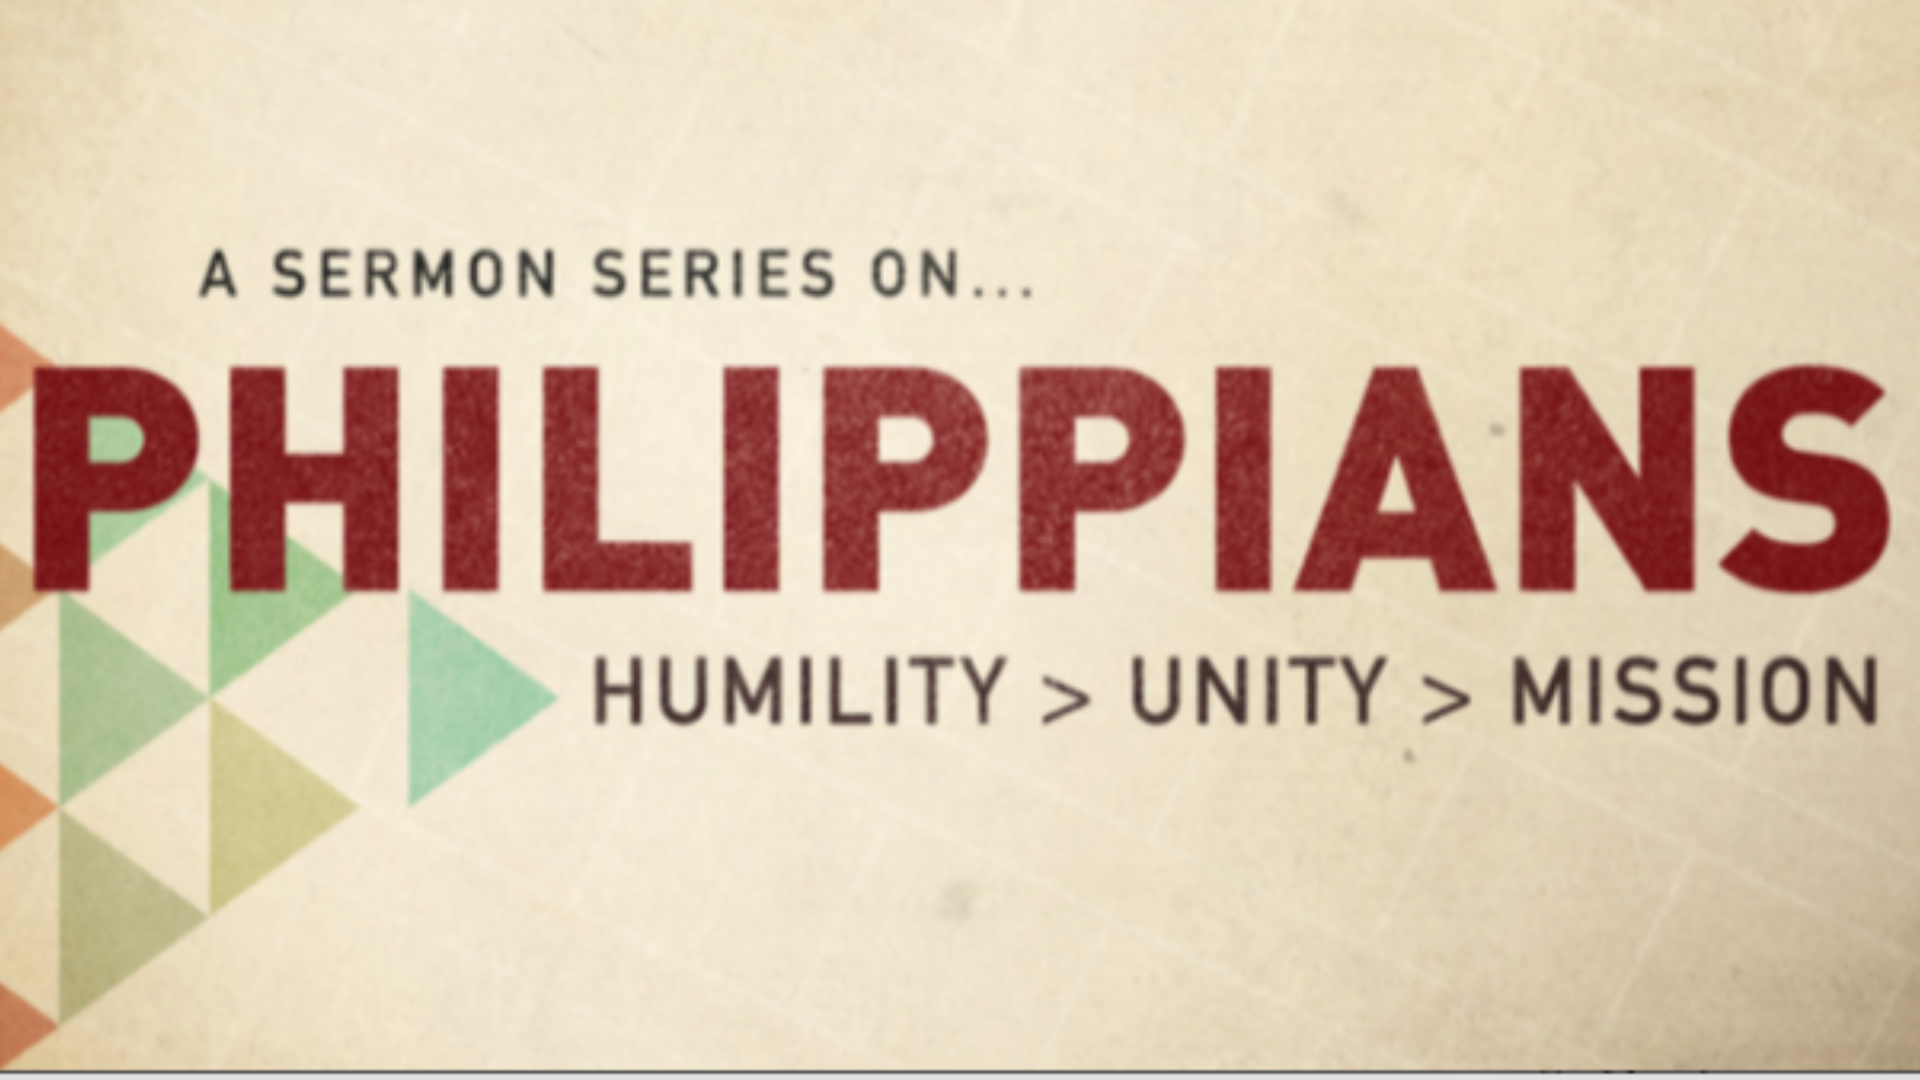 Philippians | Humility > Unity > Mission banner